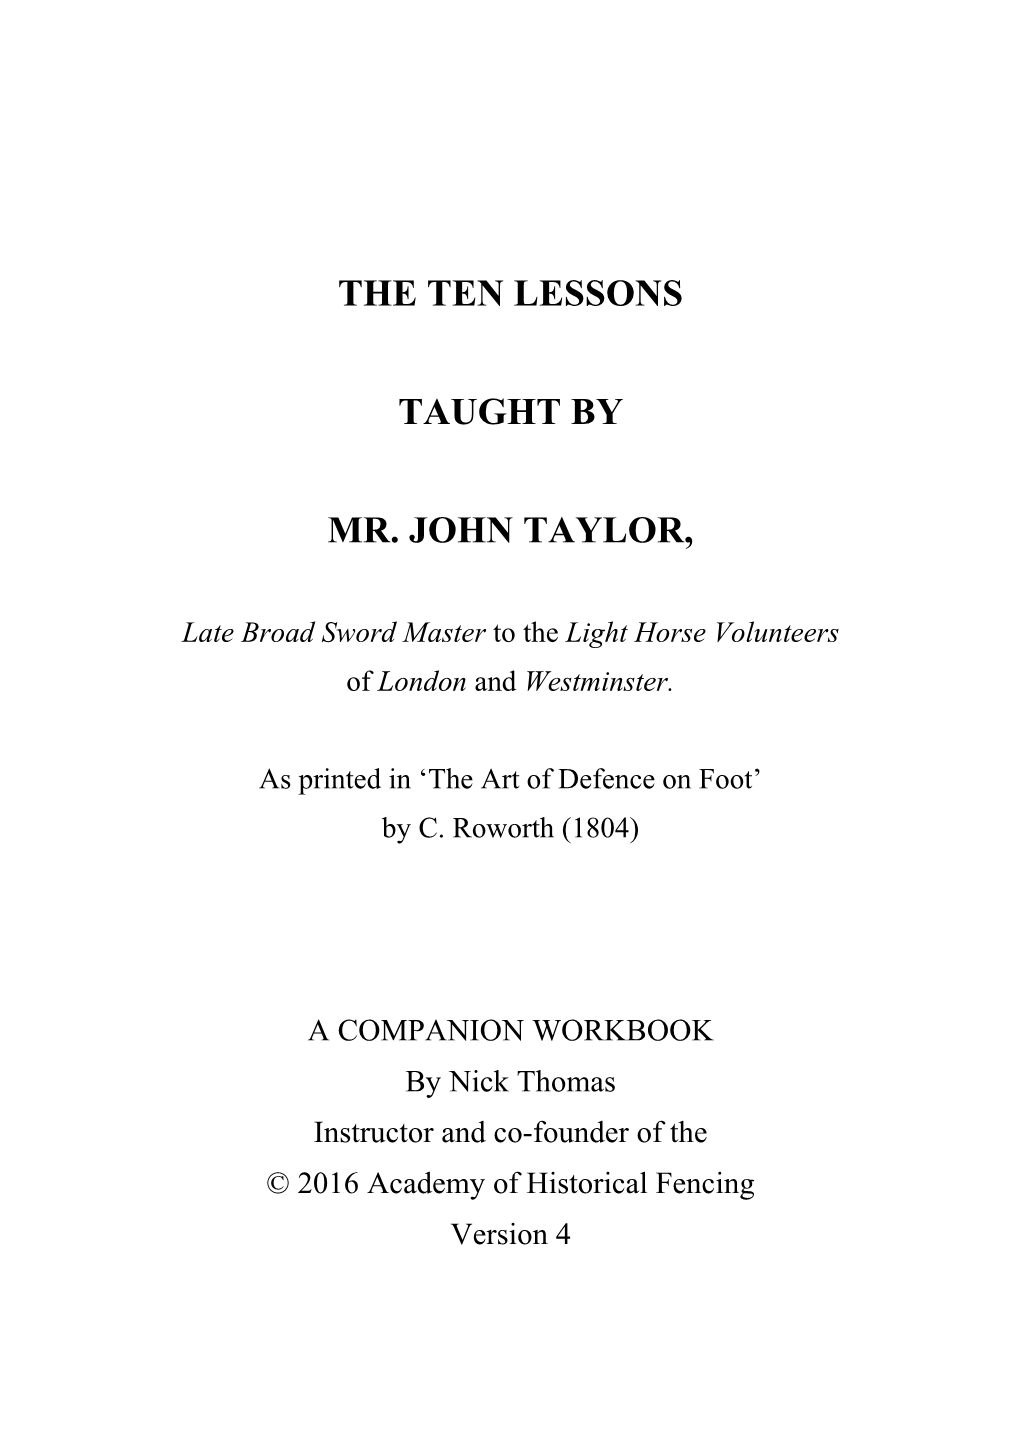 The Ten Lessons Taught by Mr. John Taylor